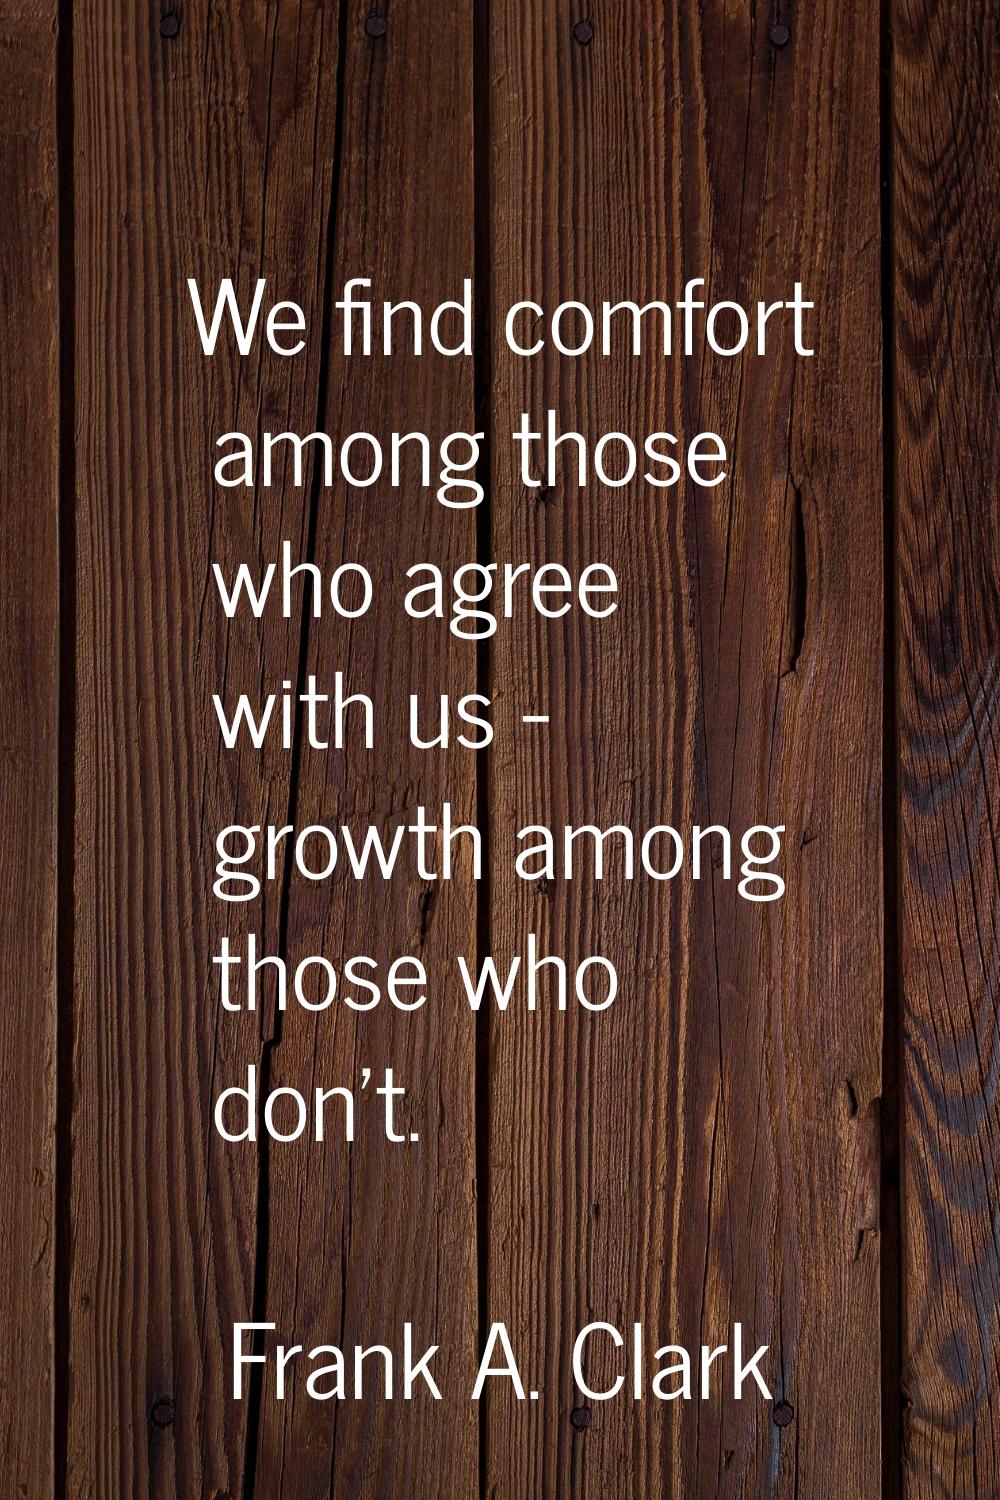 We find comfort among those who agree with us - growth among those who don't.